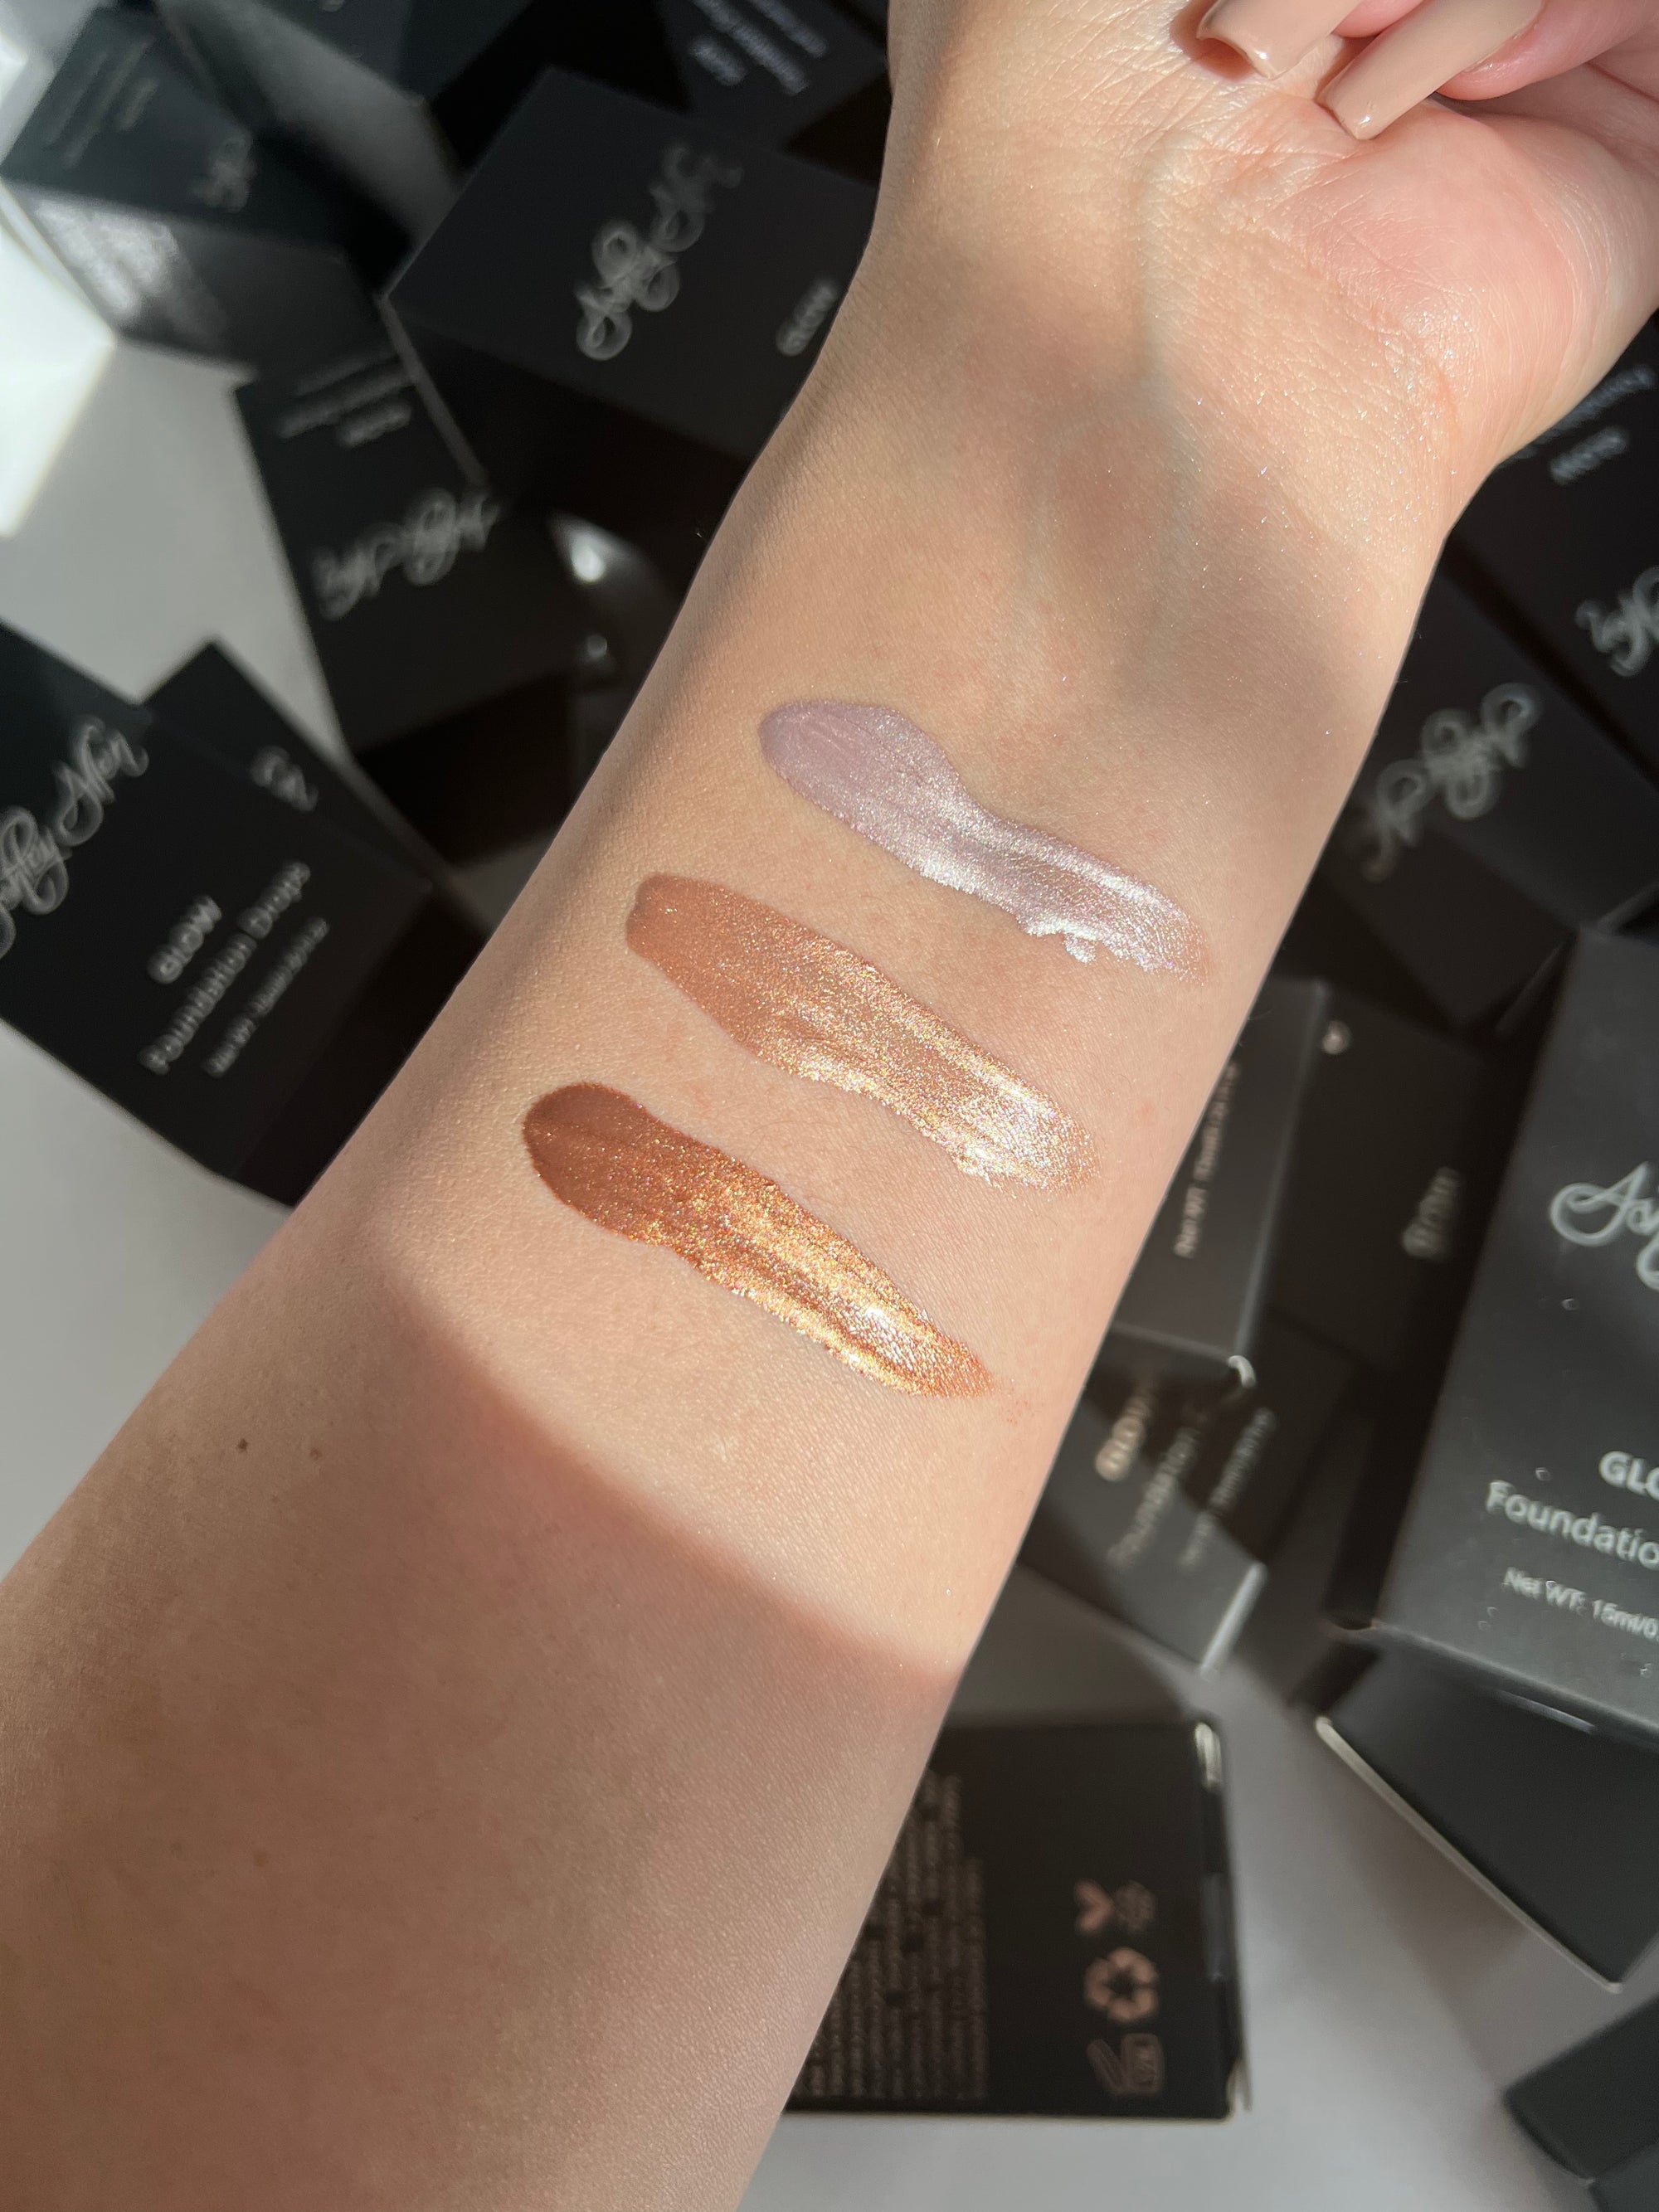 Glow Foundation Drops - Light (50% OFF) will be 17.50 activated at checkout